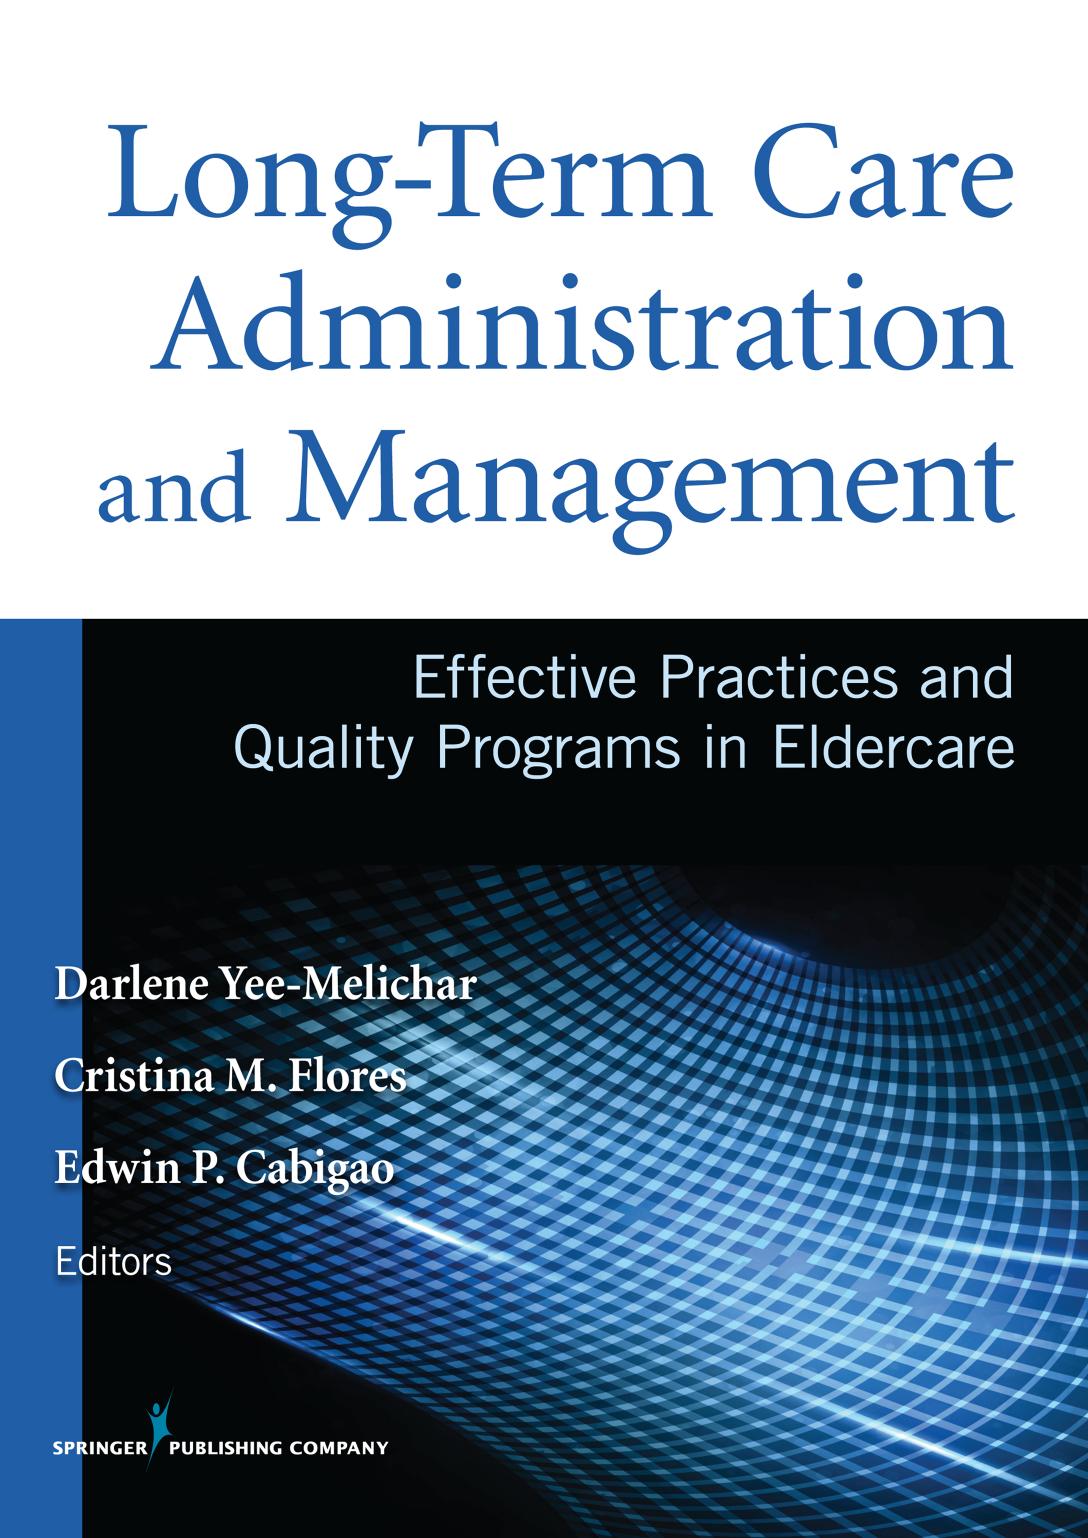 Long-Term Care Administration and Management: Effective Practices and Quality Programs in Eldercare by Darlene Yee-Melichar; Cristina Flores; Edwin Cabigao